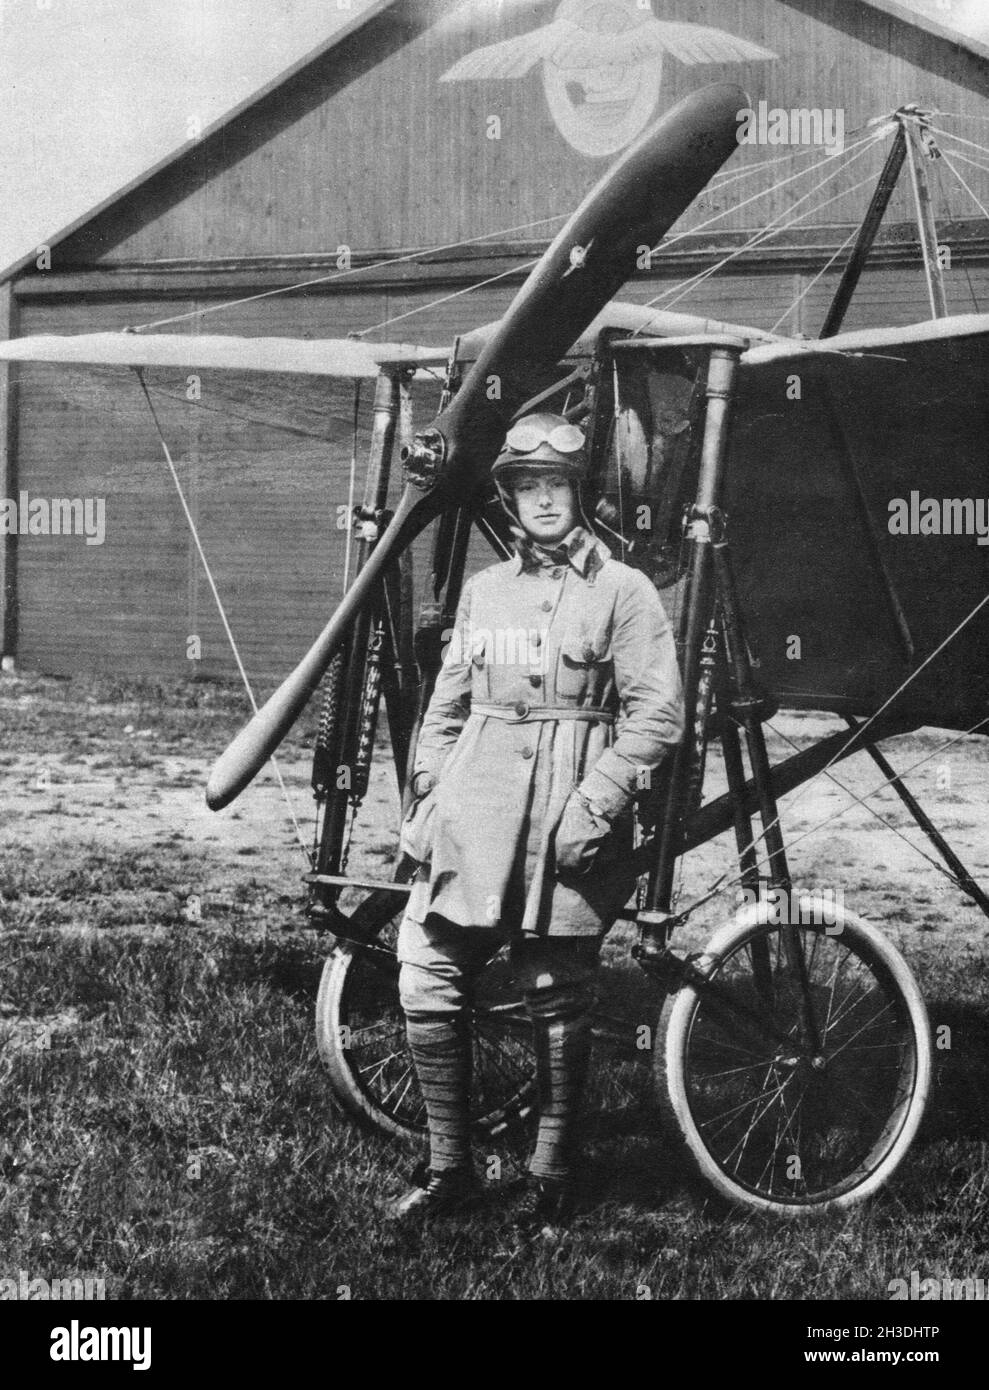 Elsa Teresia Andersson born april 27 1897, dead january 22 1922 was a swedish pilot and aviator piooner and the first swedish woman who got a flying permit. She was also one of the first swedish parachute jumpers. On her fifth jump she died. Stock Photo